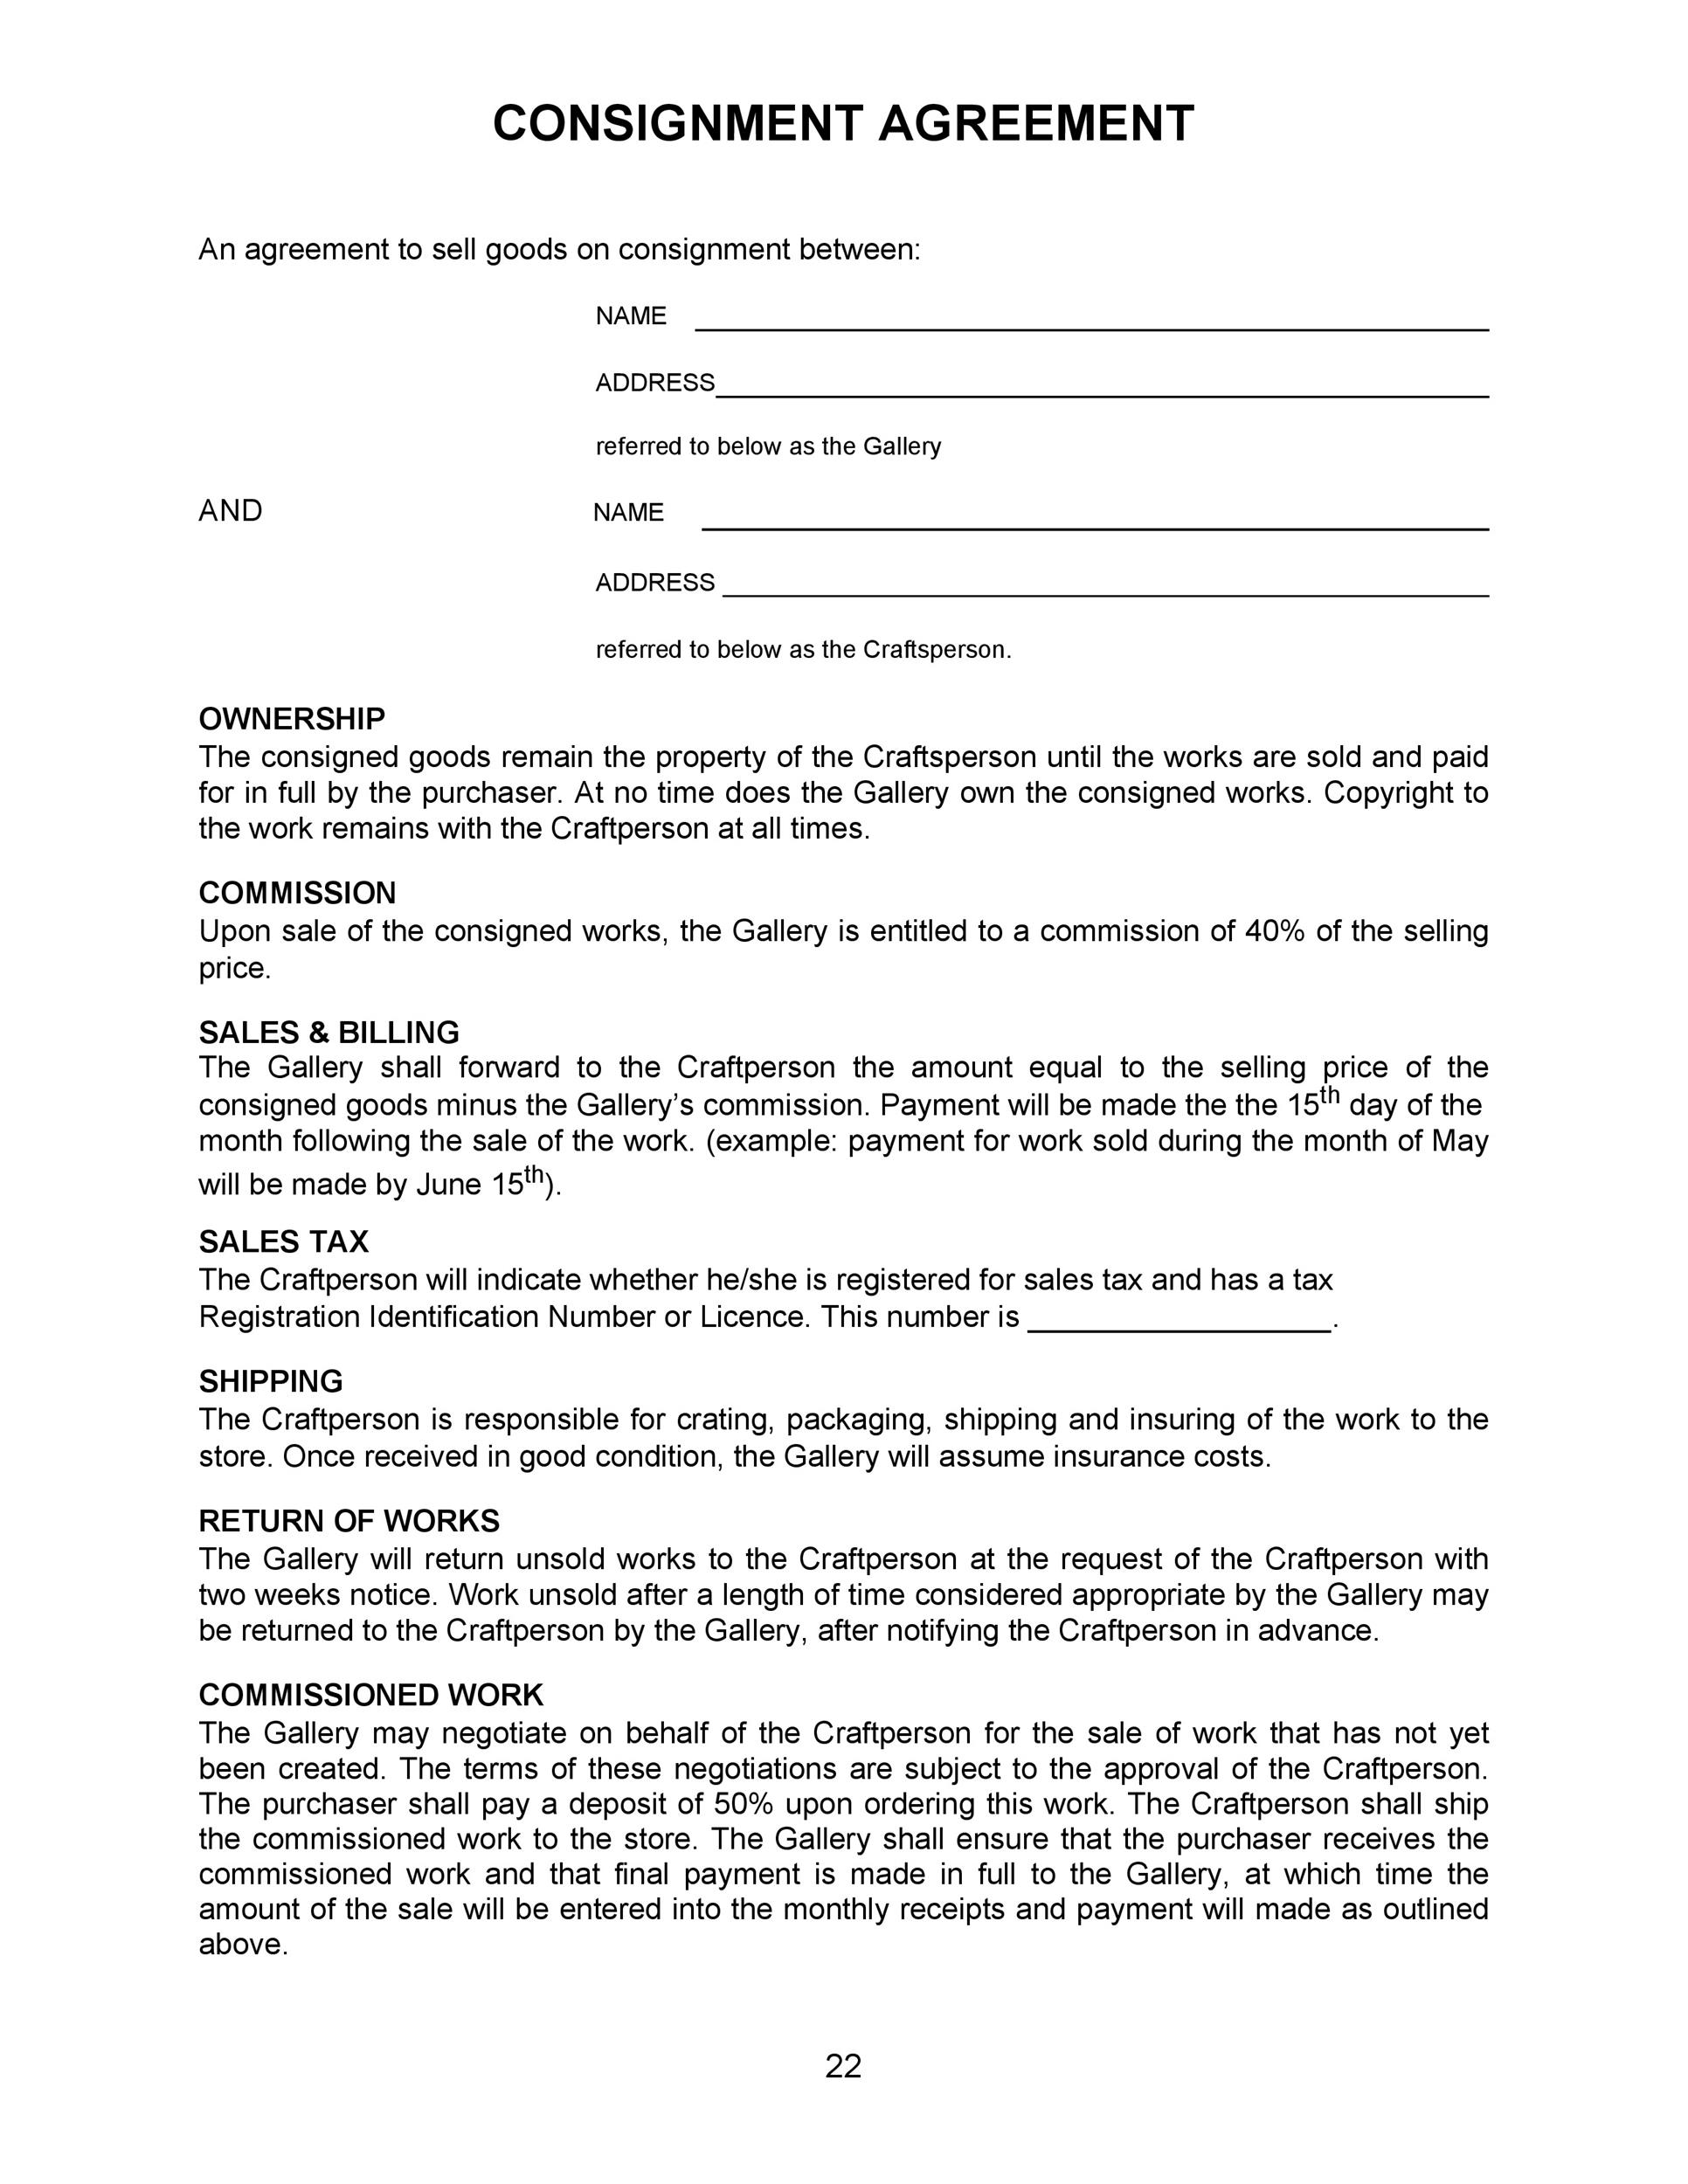 Free Consignment Agreement Template 42